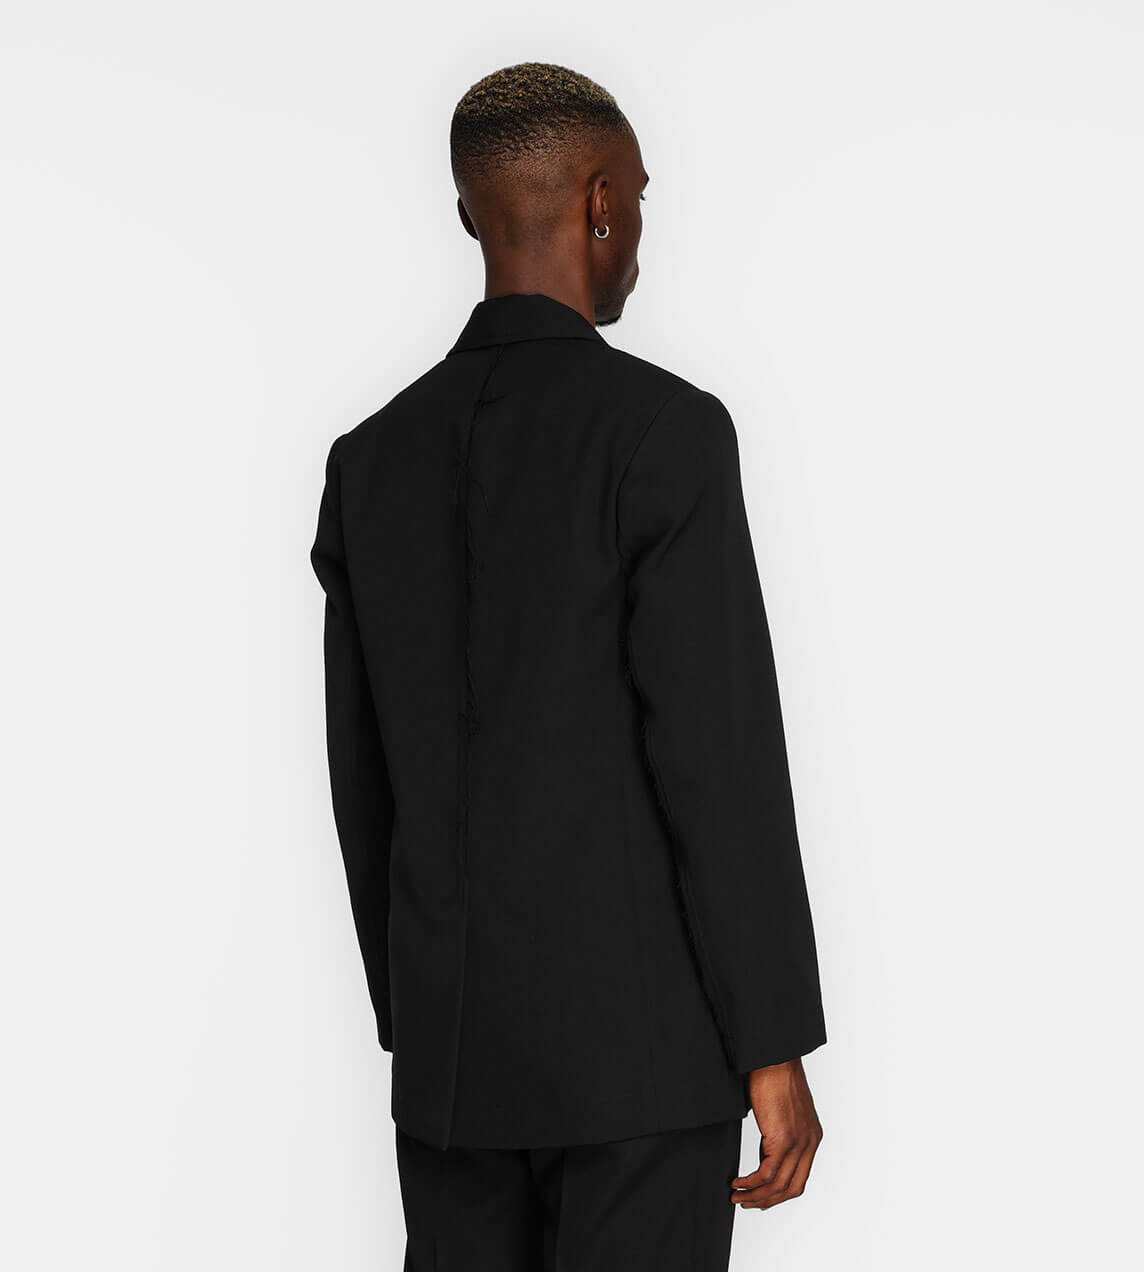 Song For The Mute - Mirror Oversized Blazer Black